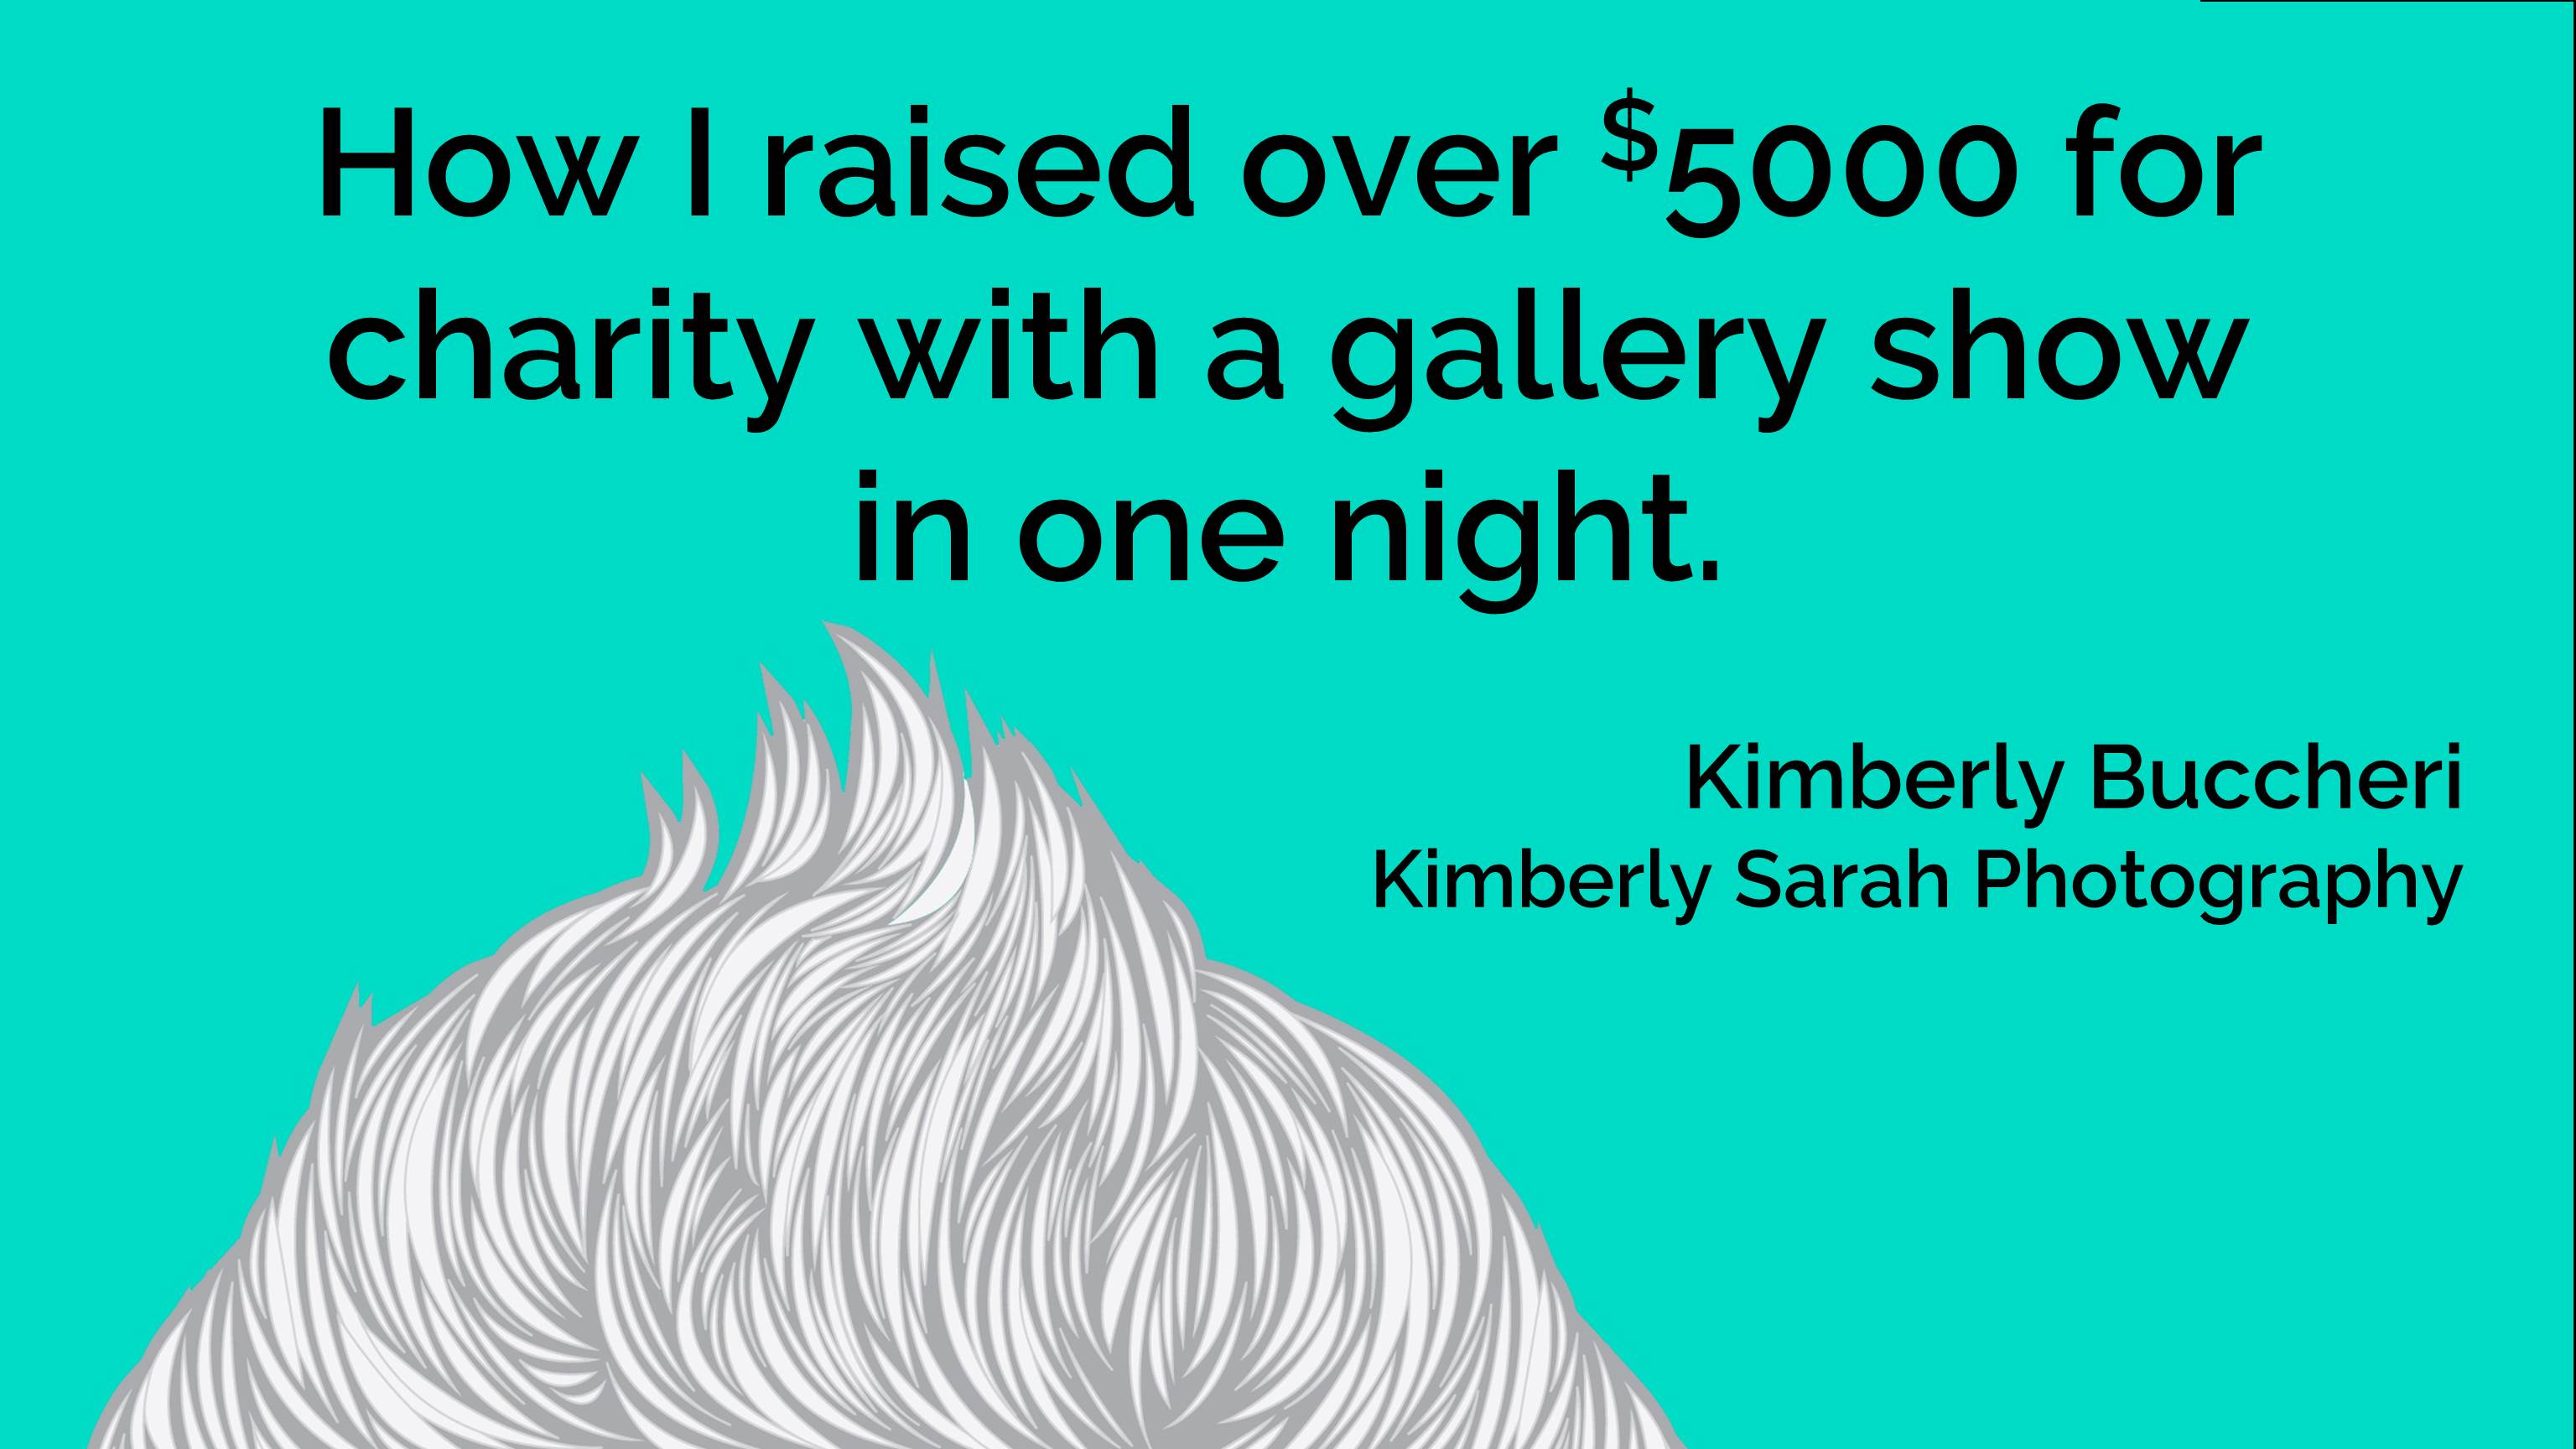 How I raised over $5000 for dog charity with a gallery show in one night.